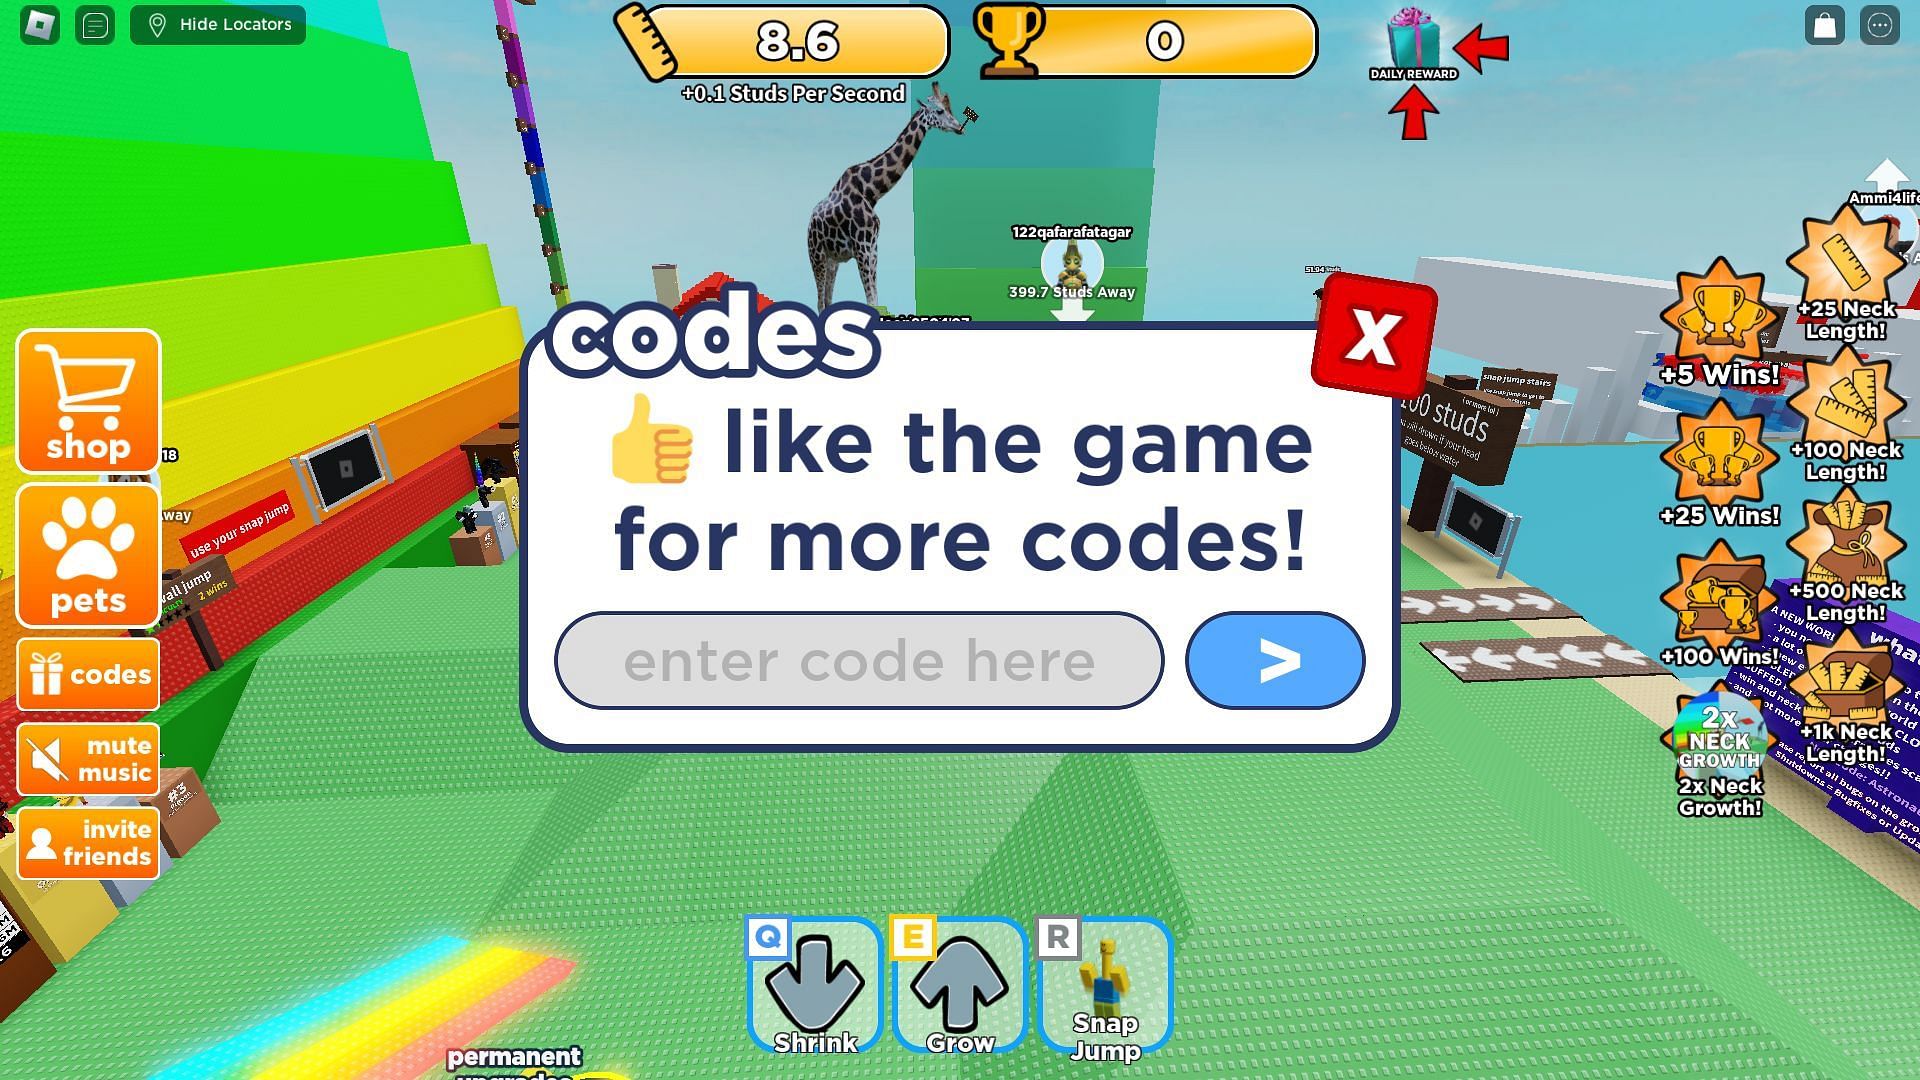 Active codes for Every Second Your Neck Grows (Image via Roblox)